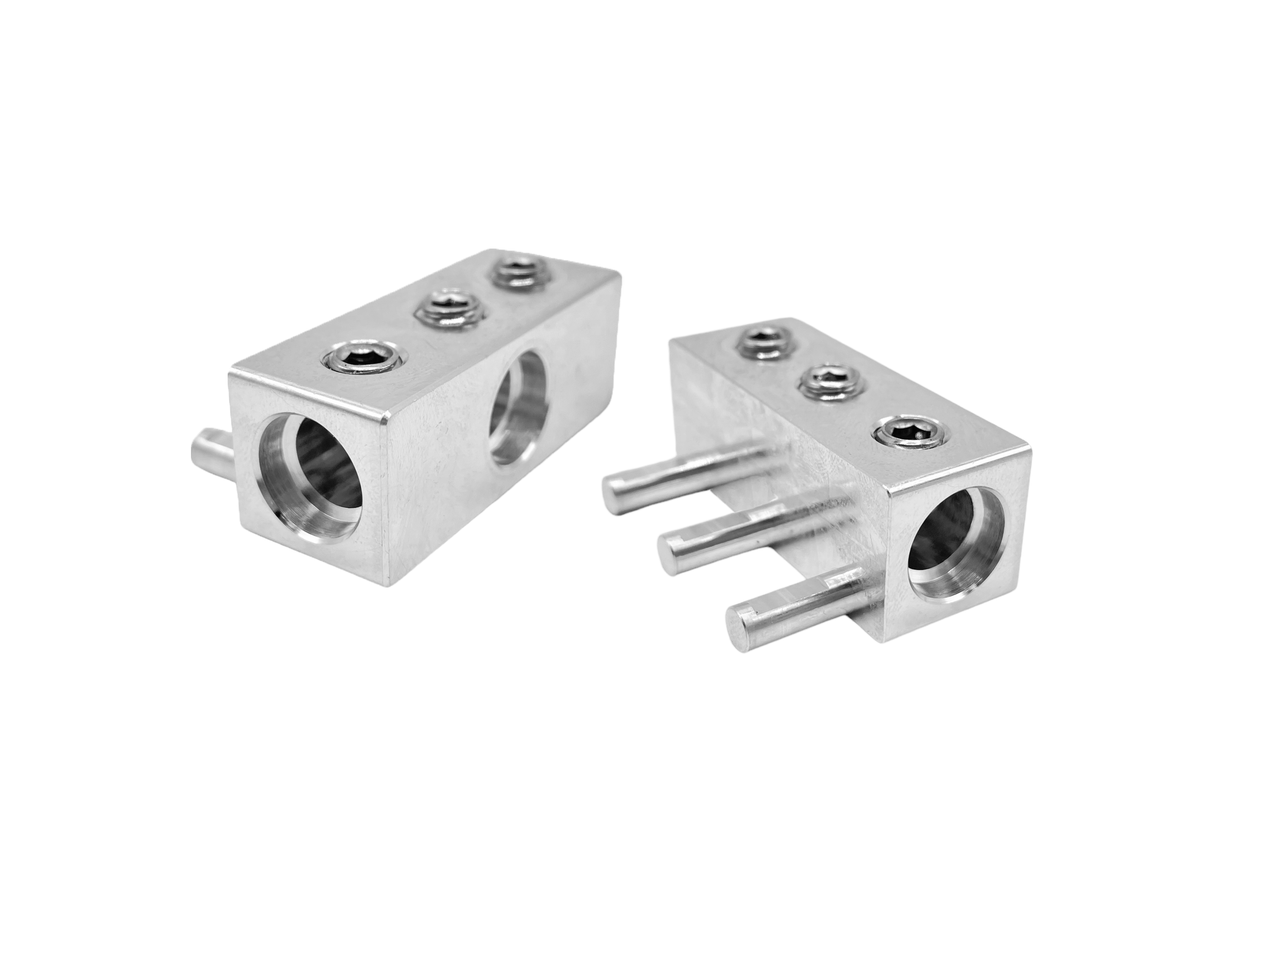 SMD Triple LRC Cable Adapter Block - 3 x 8AWG to 3 x 4AWG (1 Adaptor)